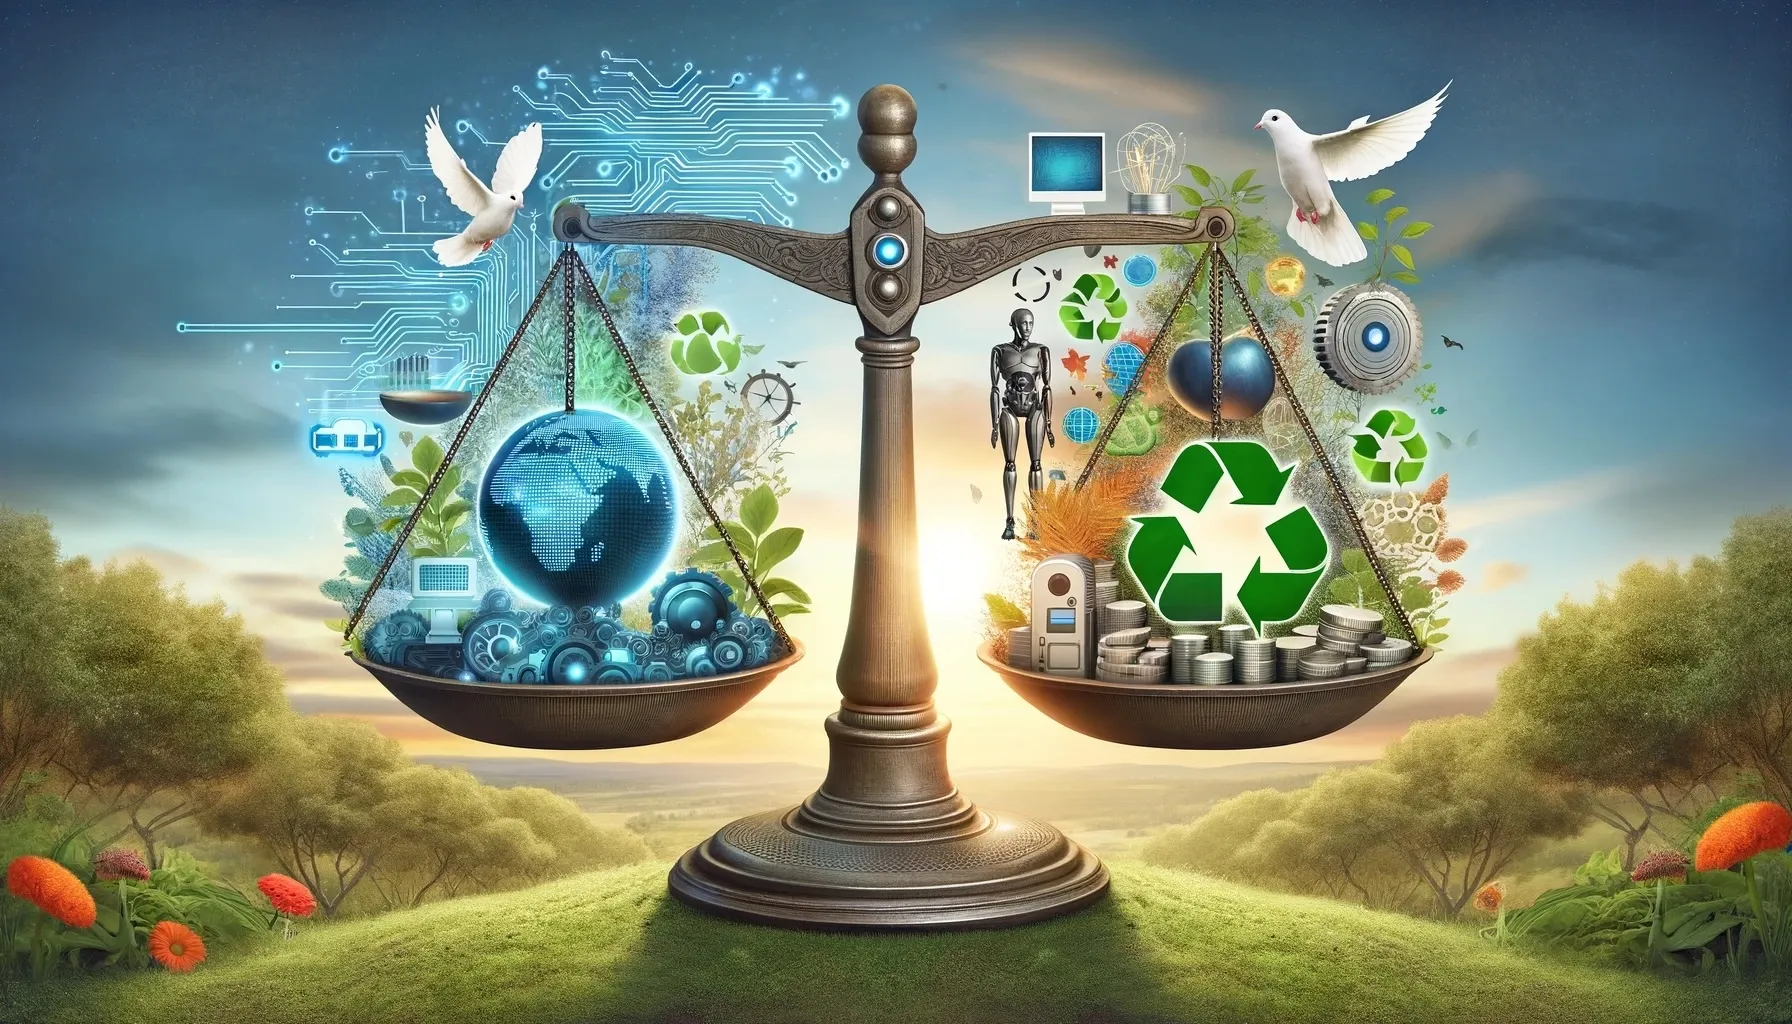 Balance scale comparing technology and nature, symbolizing the balance of innovation and ecology.